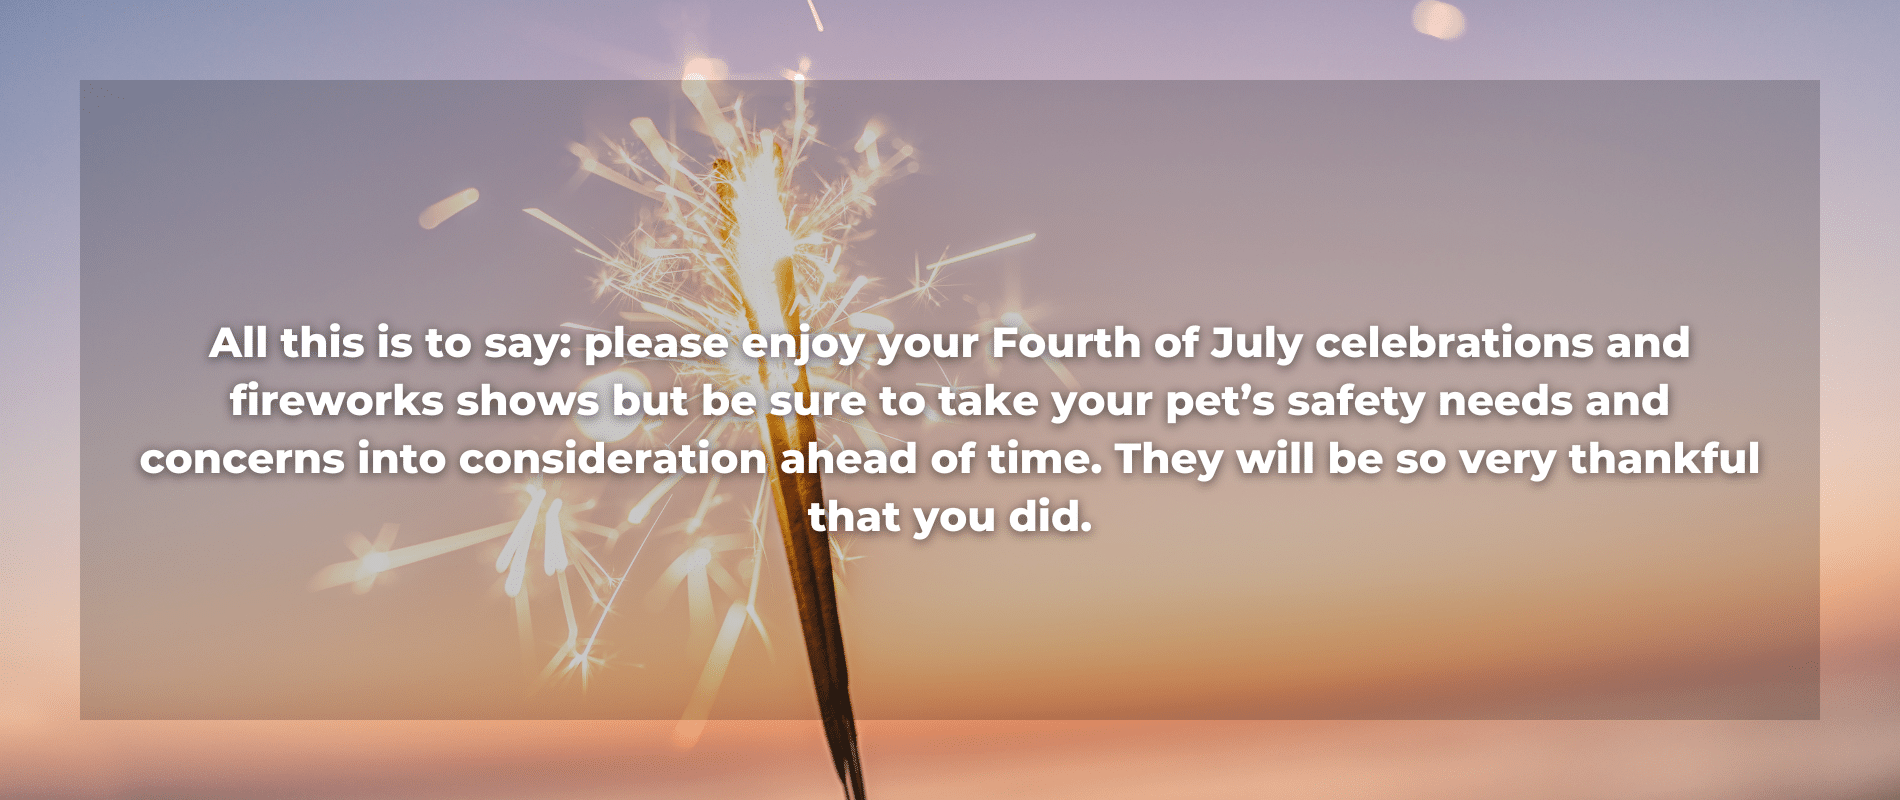 Firework with pet safety caption